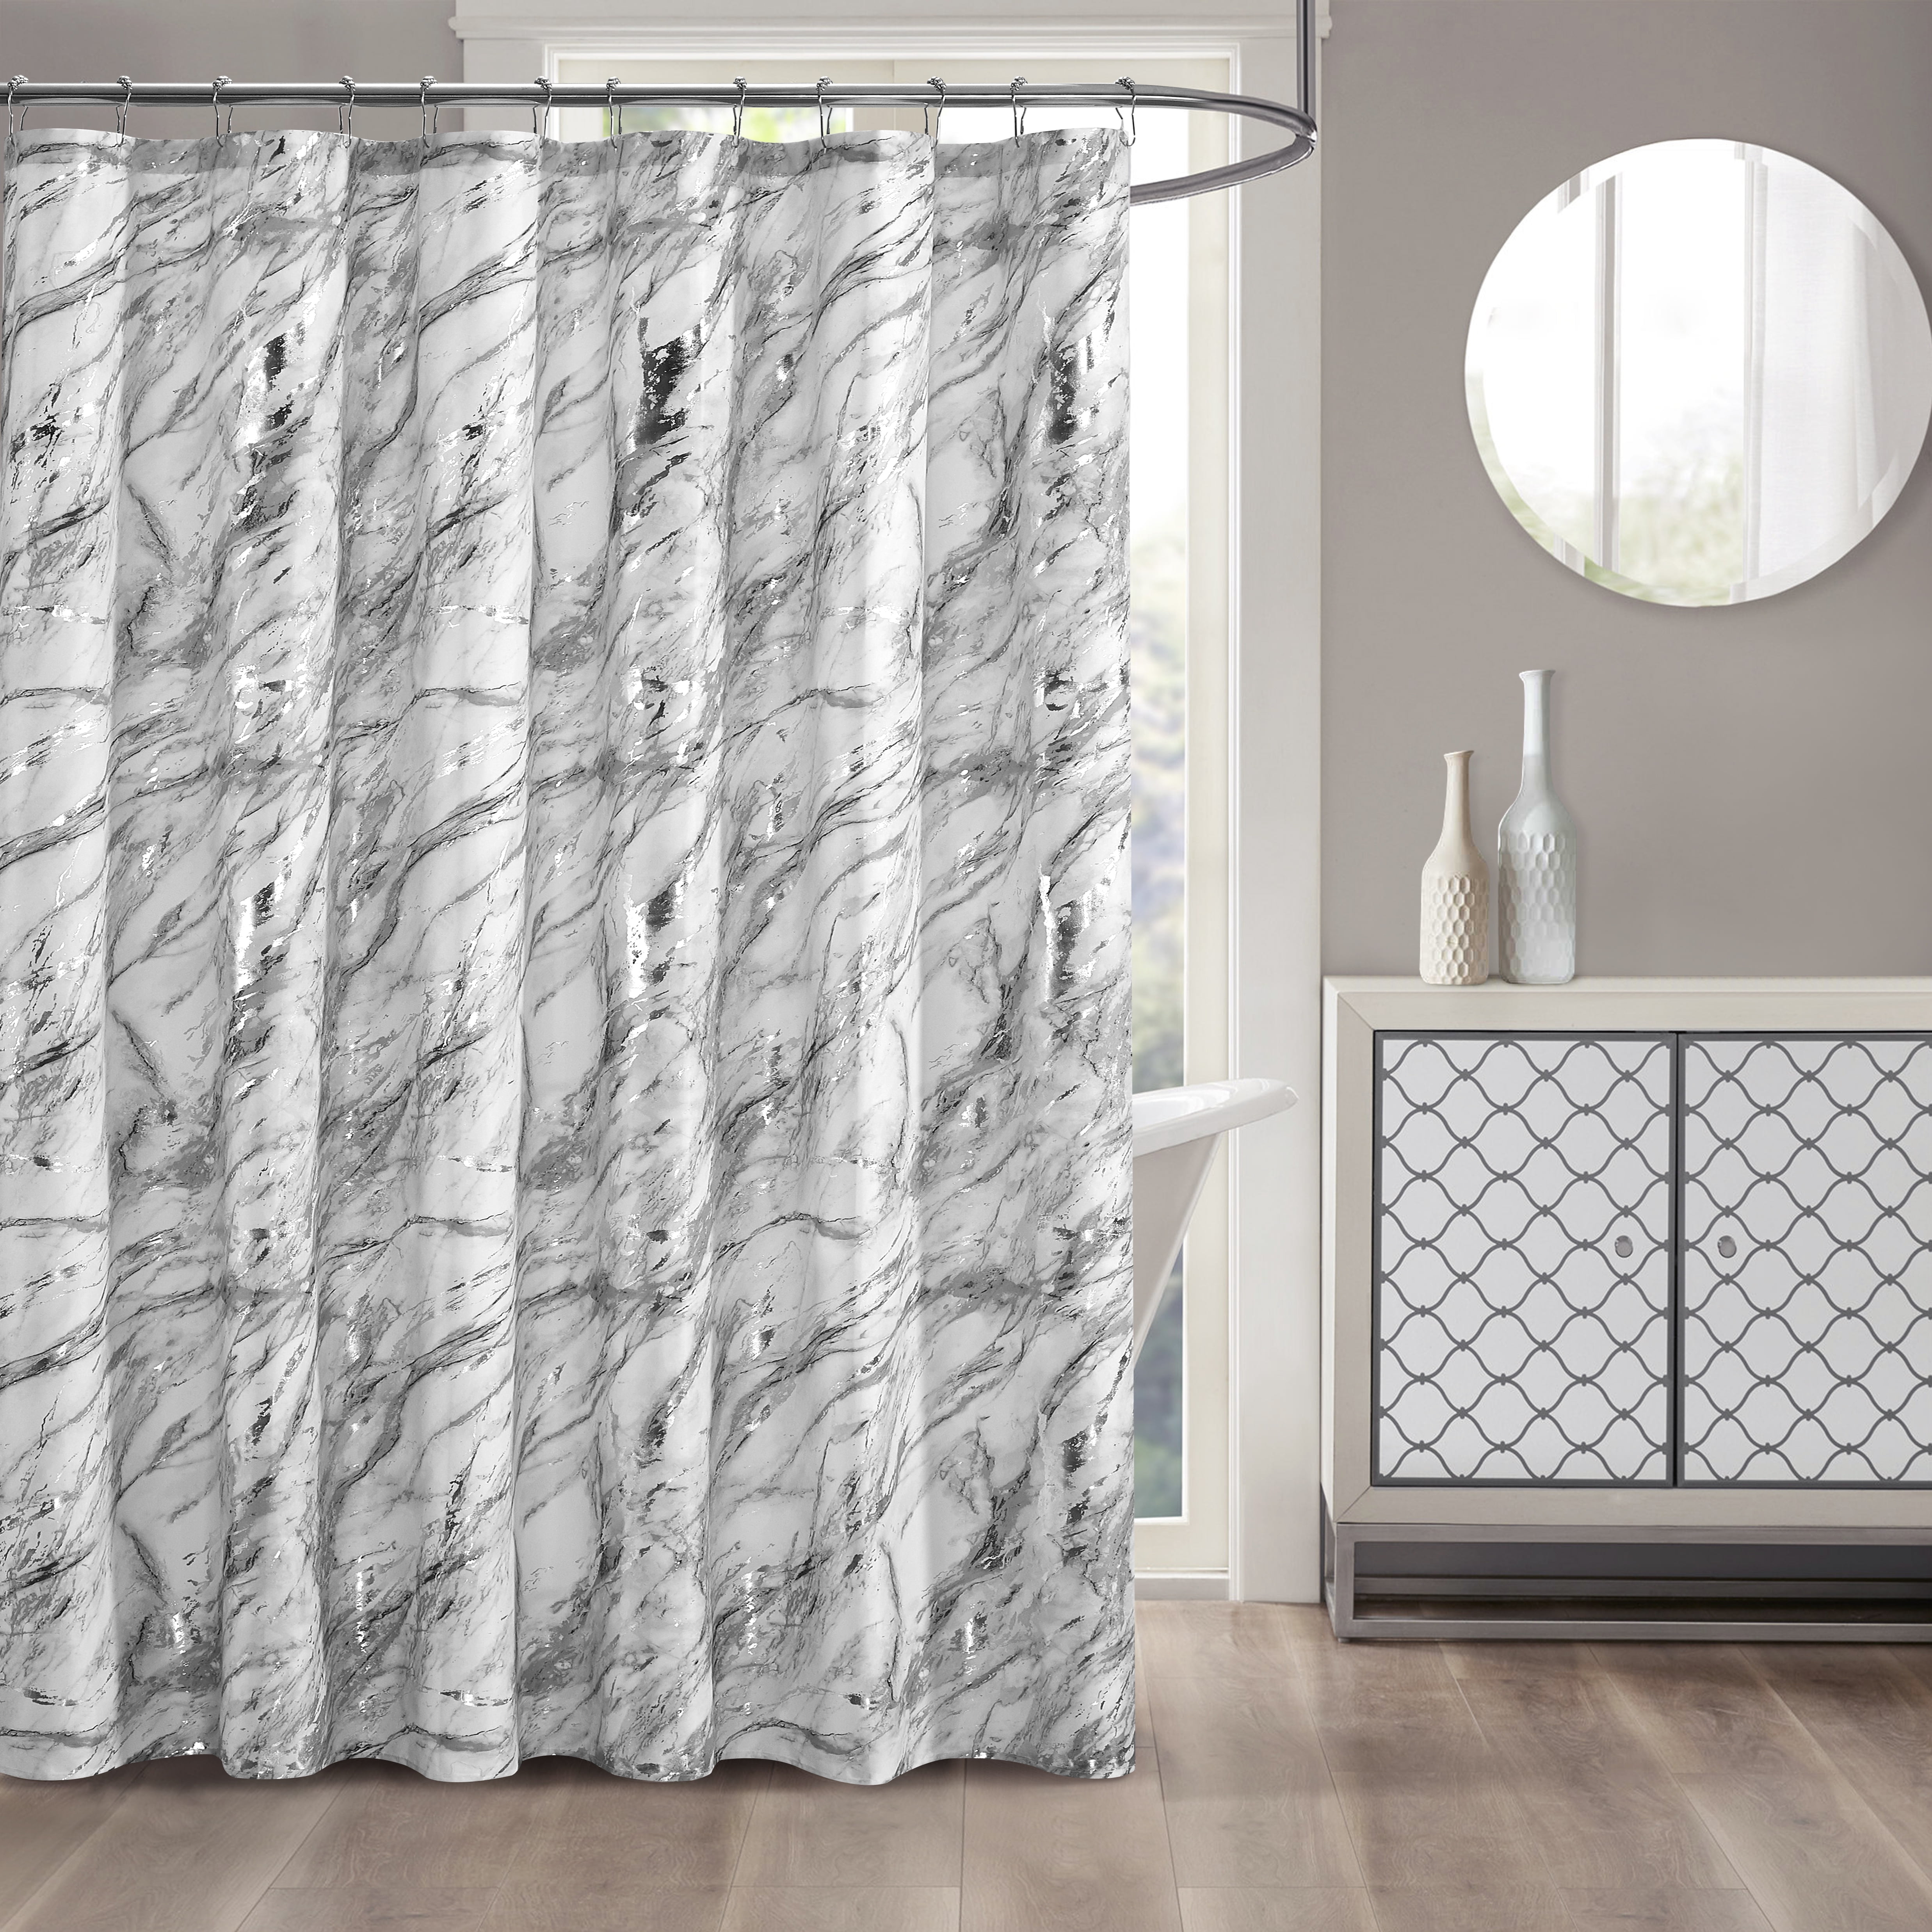 Marble Texture Shower Curtain Nature Stone Color Background Pattern Luxurious Graphic Print Polyester Fabric Bathroom Decor Sets with Hooks 60 x 72 Inches Gold Grey White